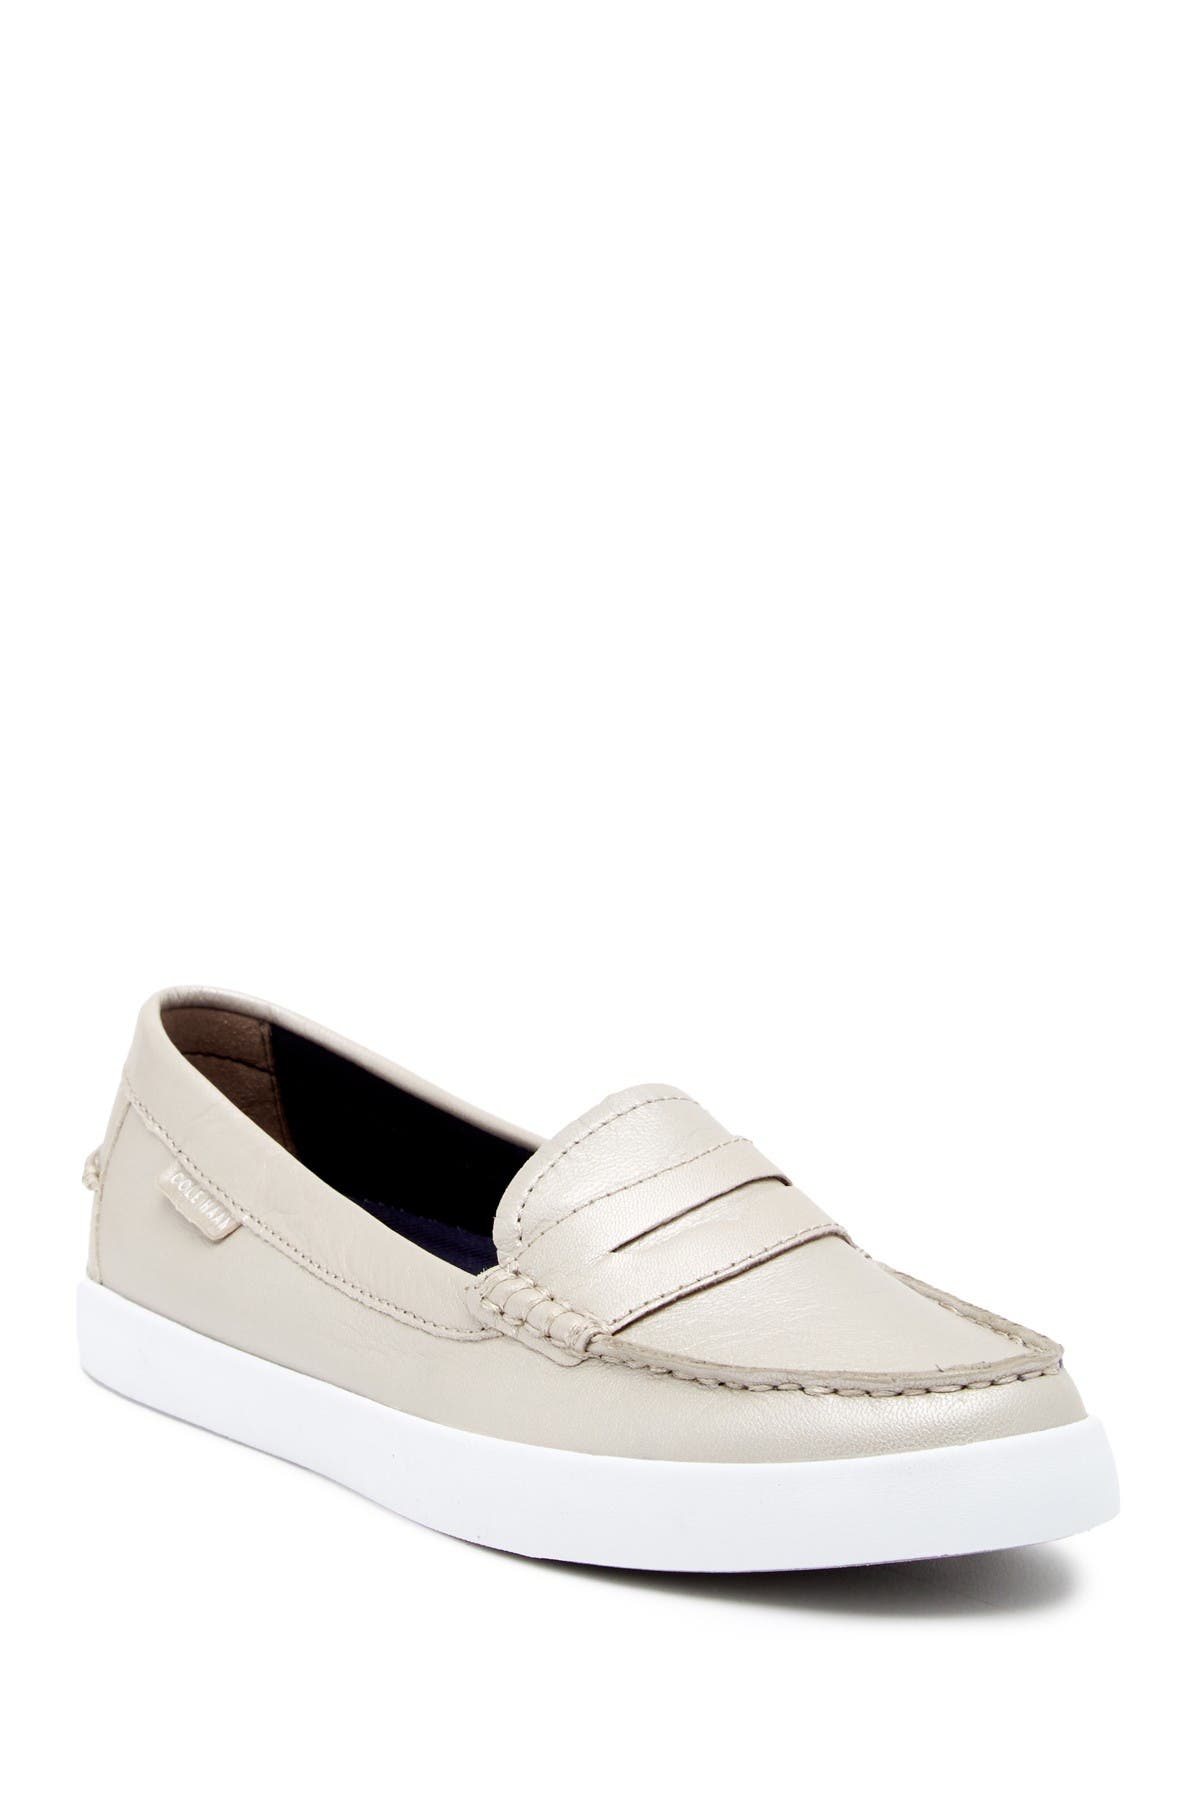 Cole Haan | Nantucket Leather Loafer II 